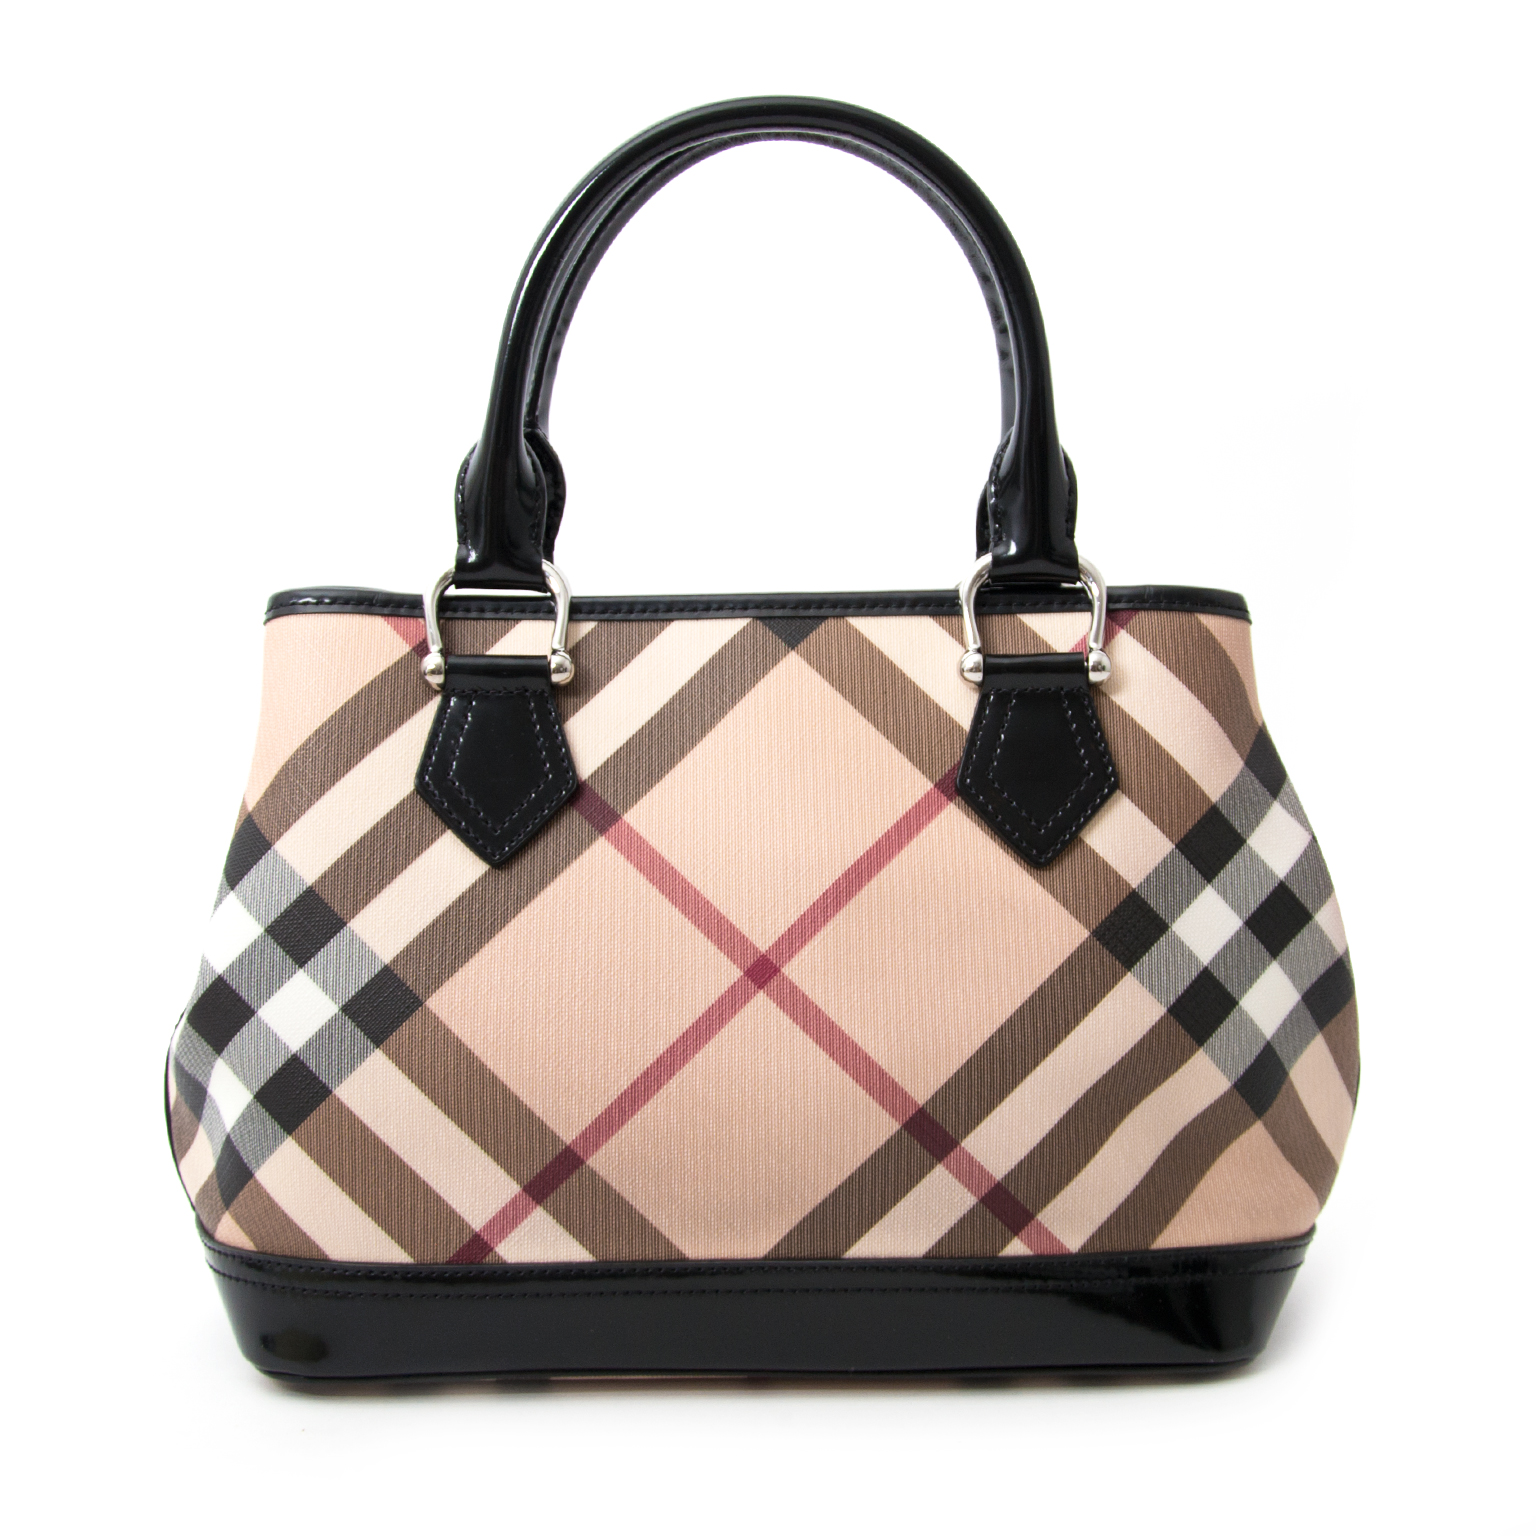 Burberry Nova Check Tote Bag ○ Labellov ○ Buy and Sell Authentic Luxury